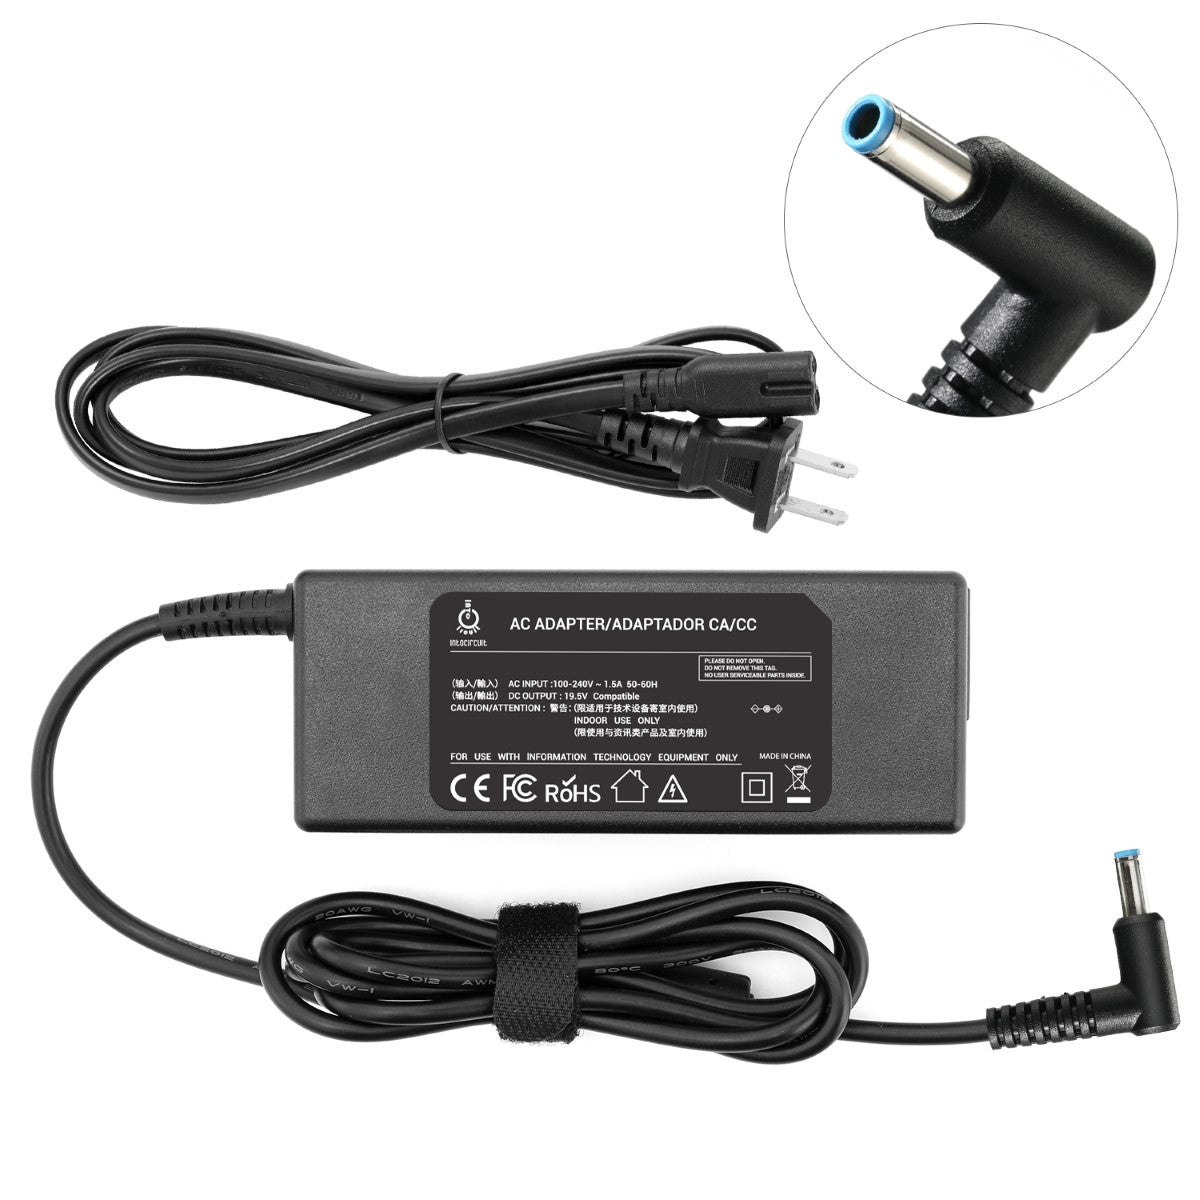 Charger for HP 15-g277nr Notebook